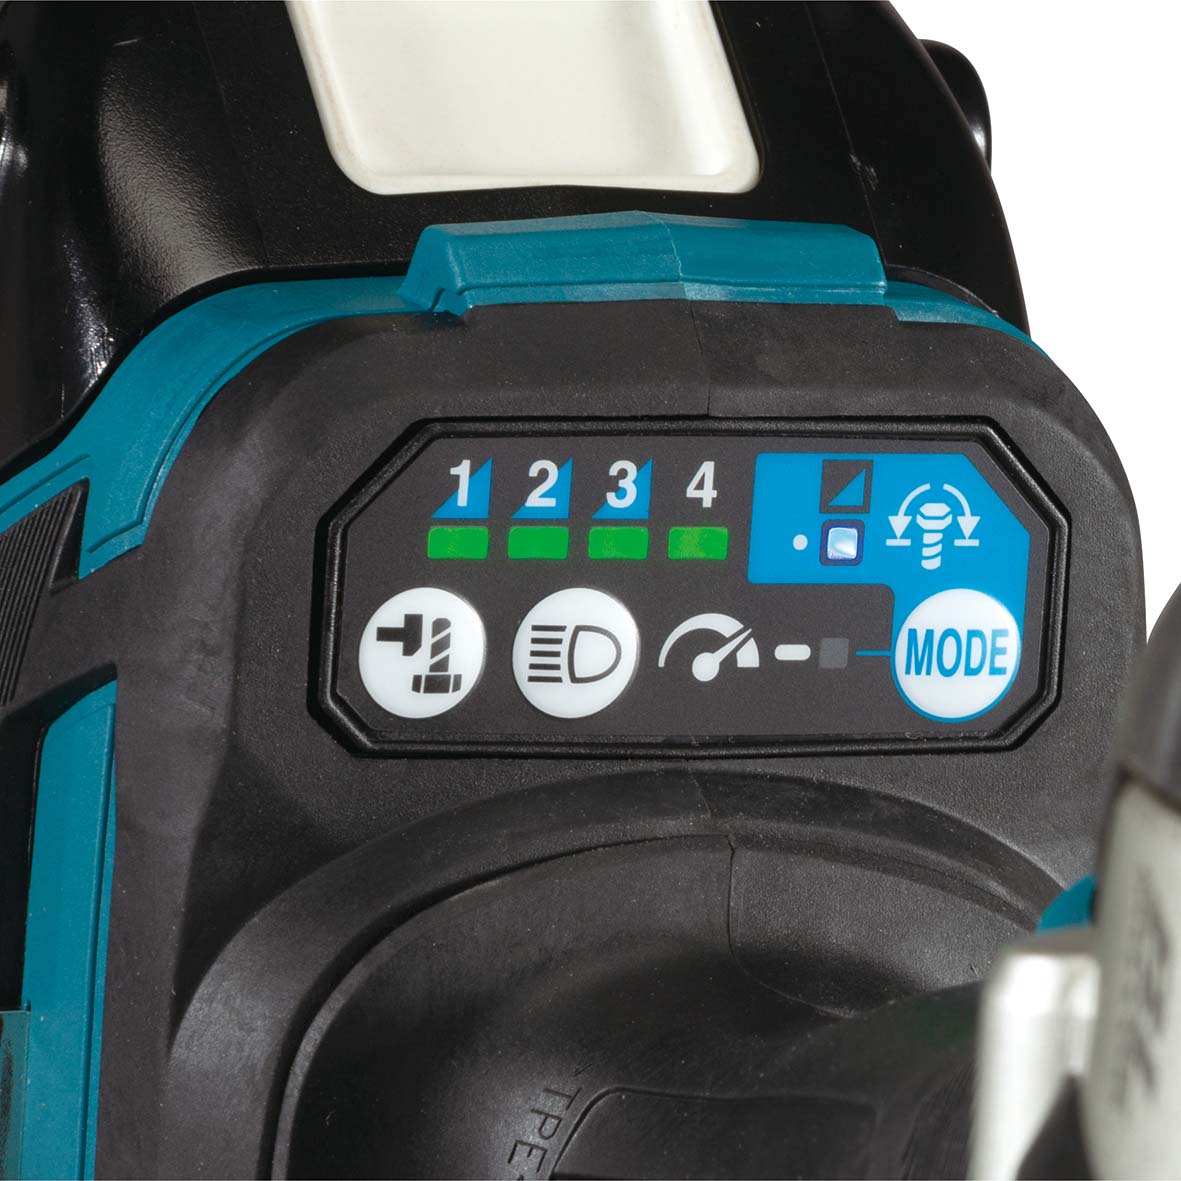 18V 1/2" Brushless Impact Wrench Bare (Tool Only) DTW700Z by Makita